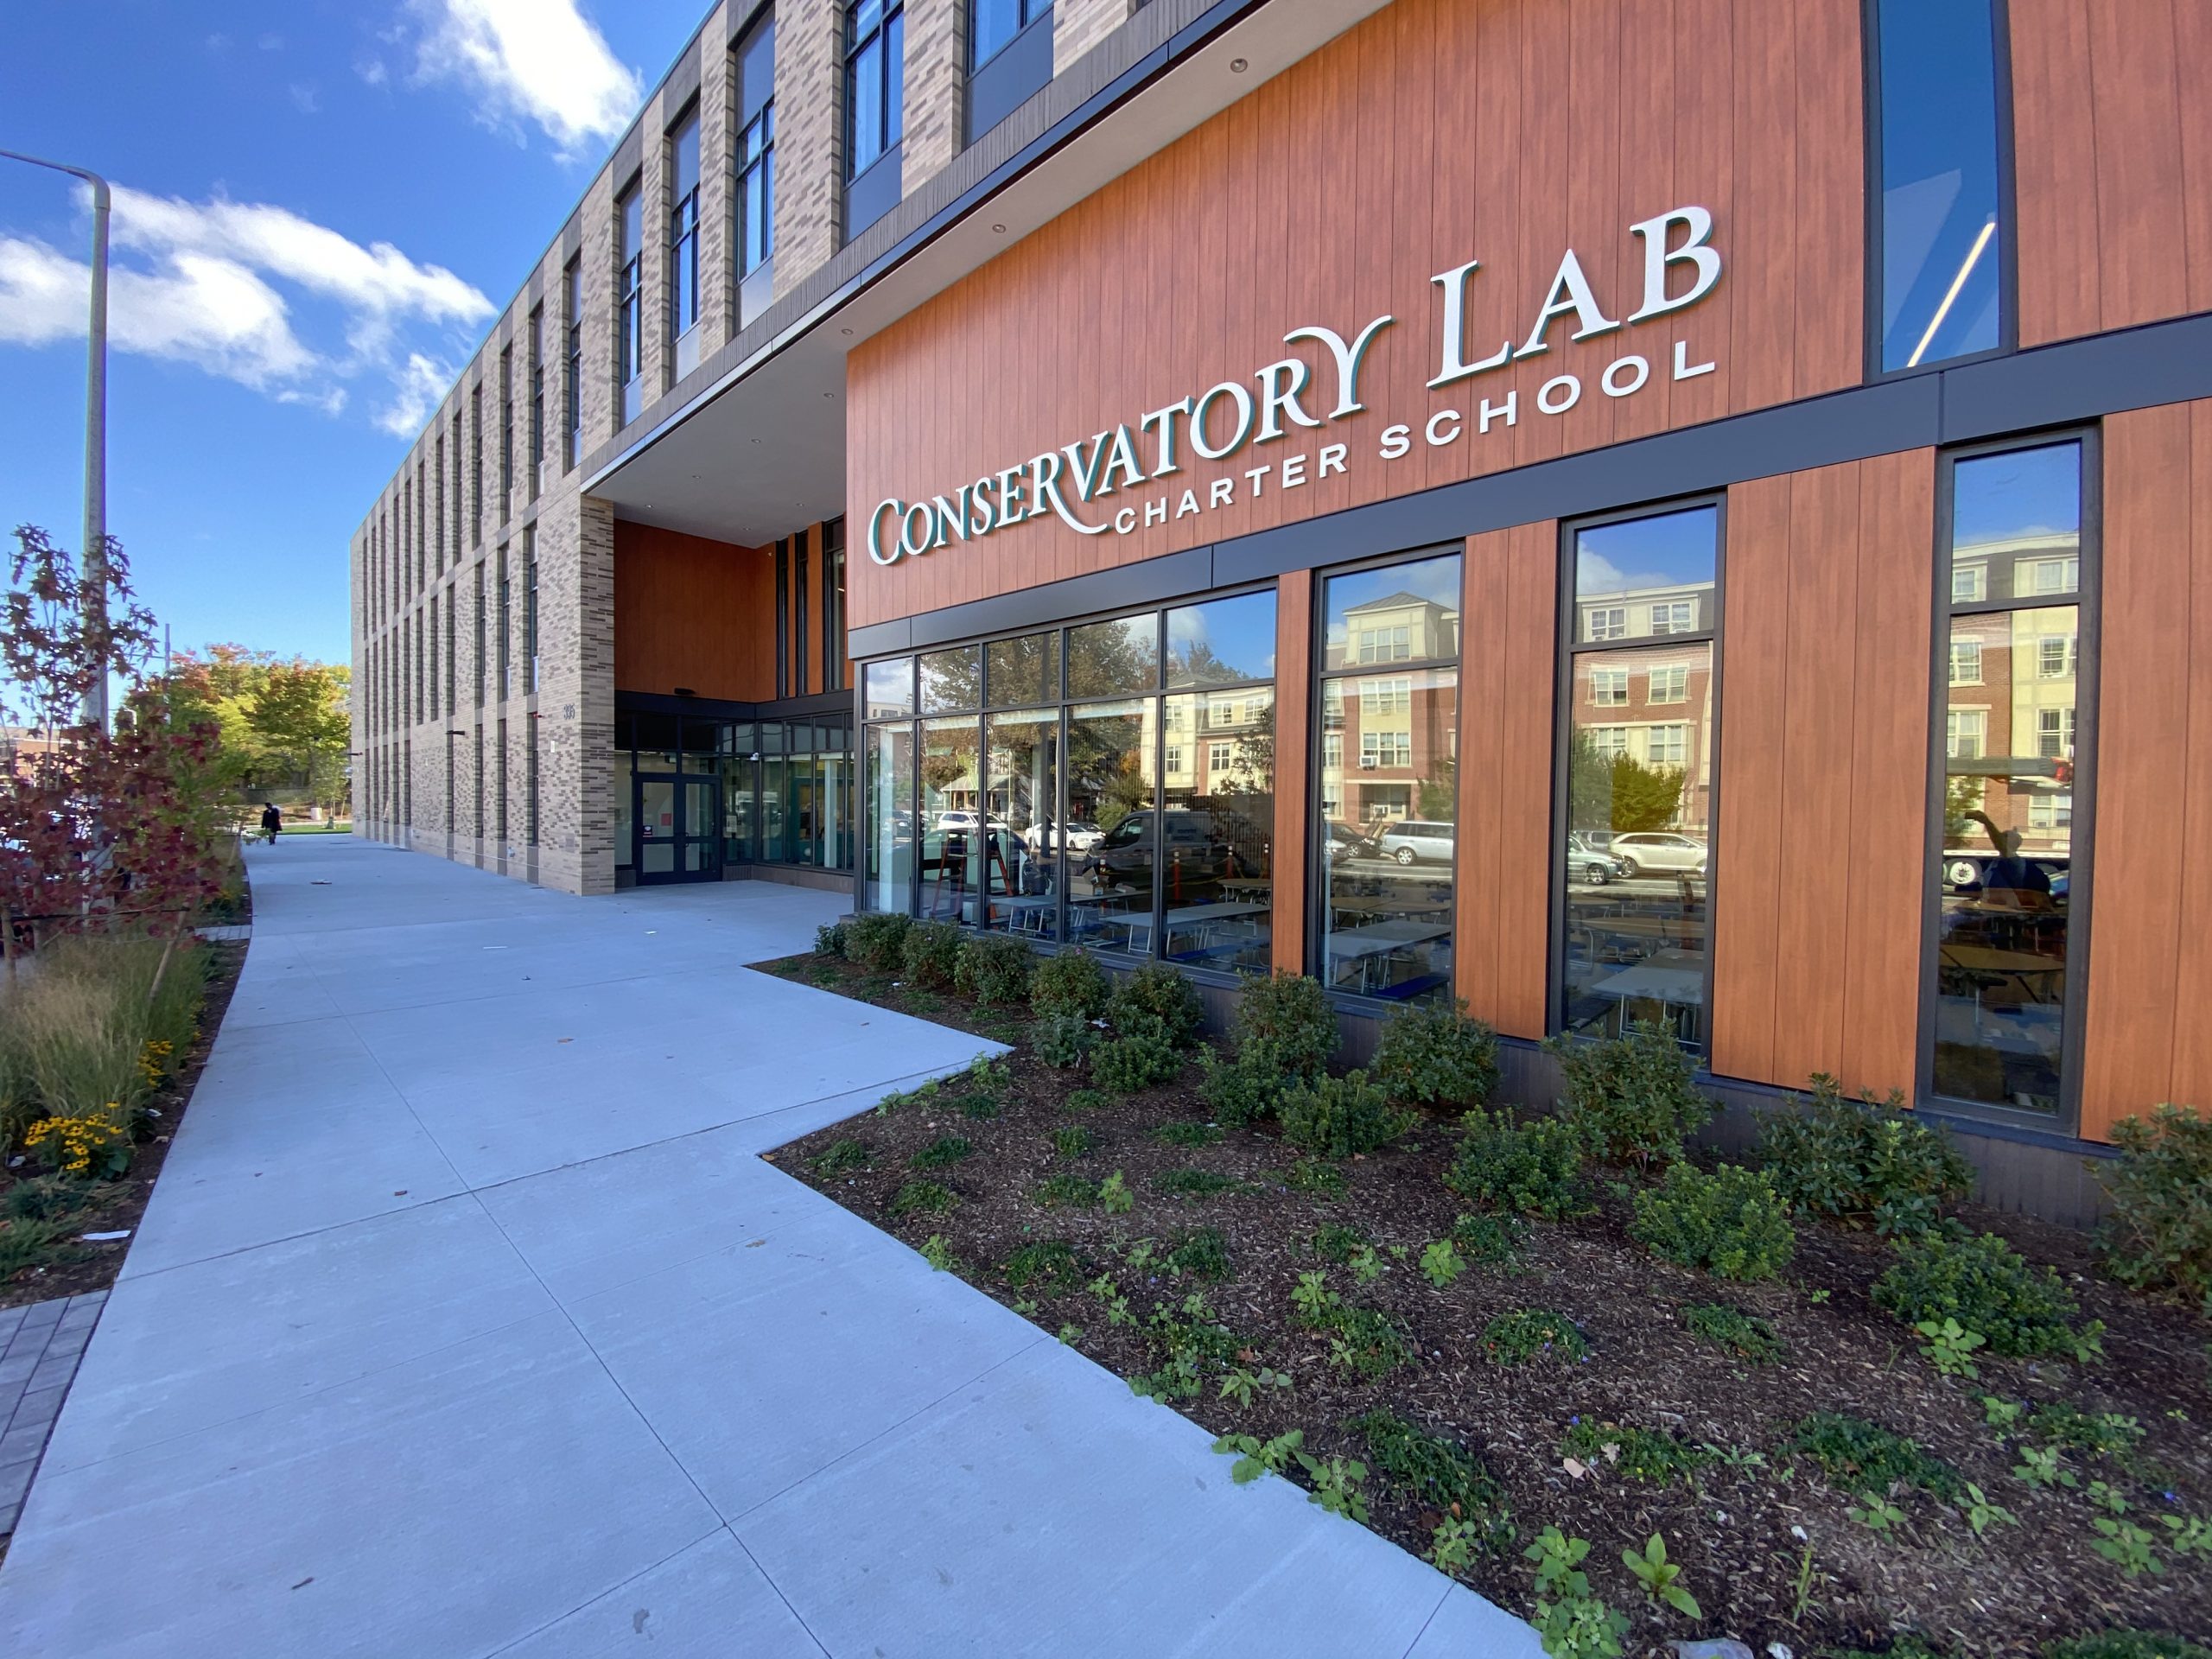 Conservatory Lab Charter School – New Academic Building